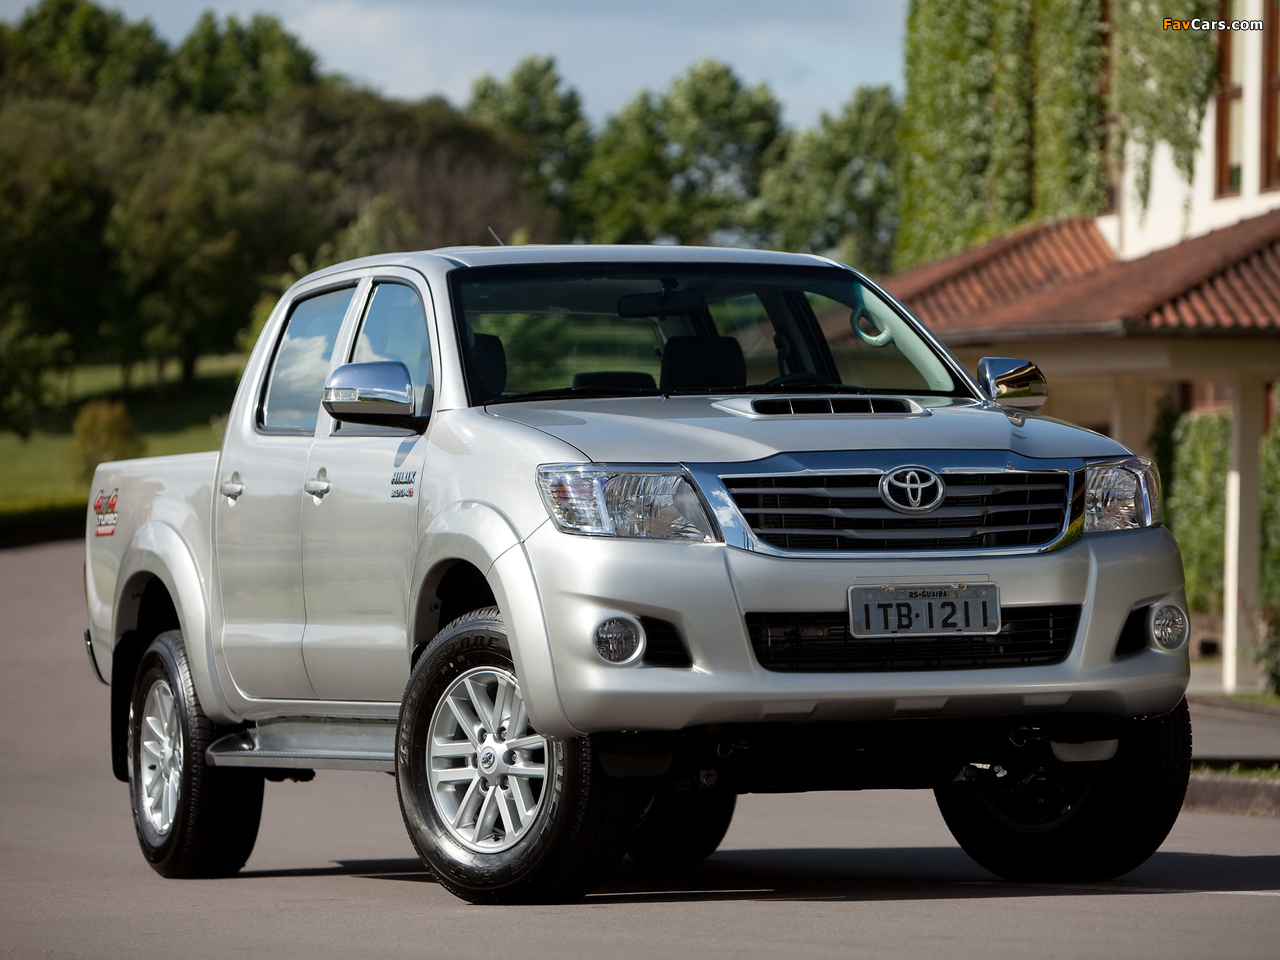 Toyota Hilux SRV Cabine Dupla 4x4 2012 pictures (1280 x 960)